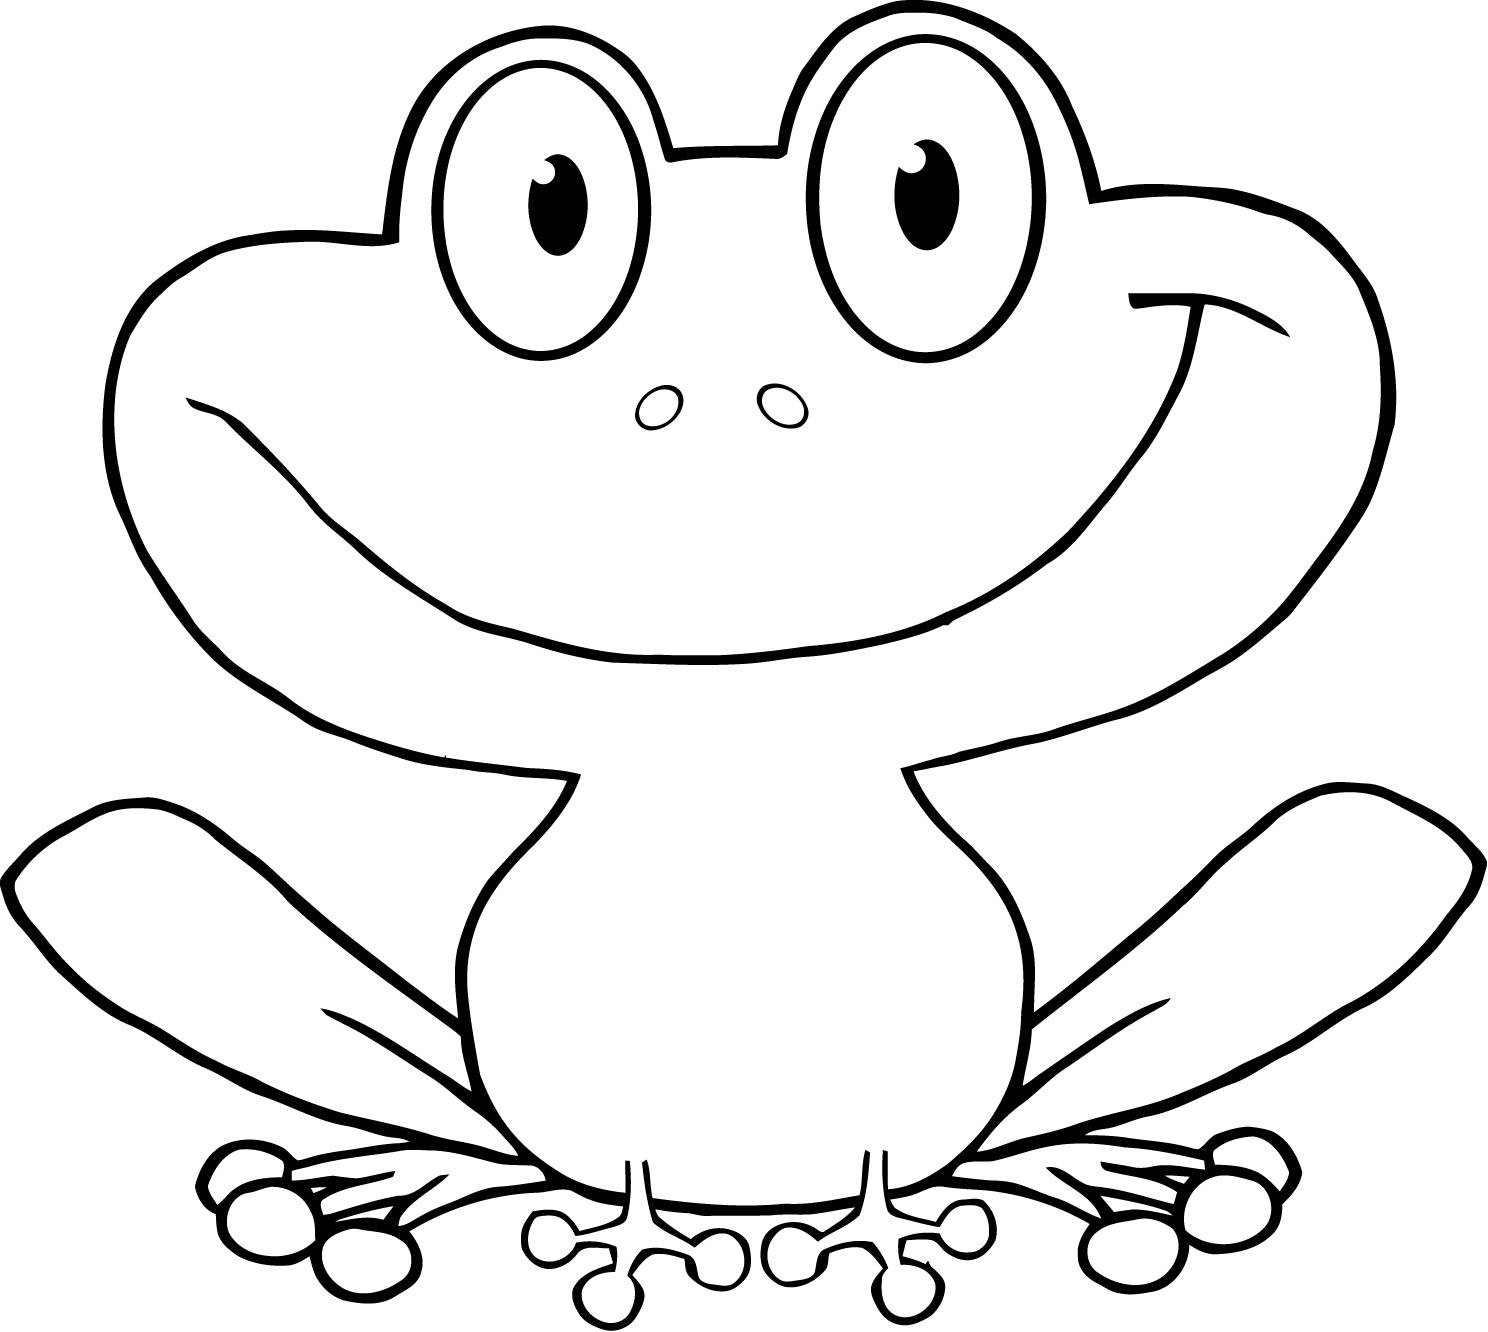 Rainforest Frog Coloring Page Free Frog Pictures For Kids Download Free Clip Art Free Clip Art